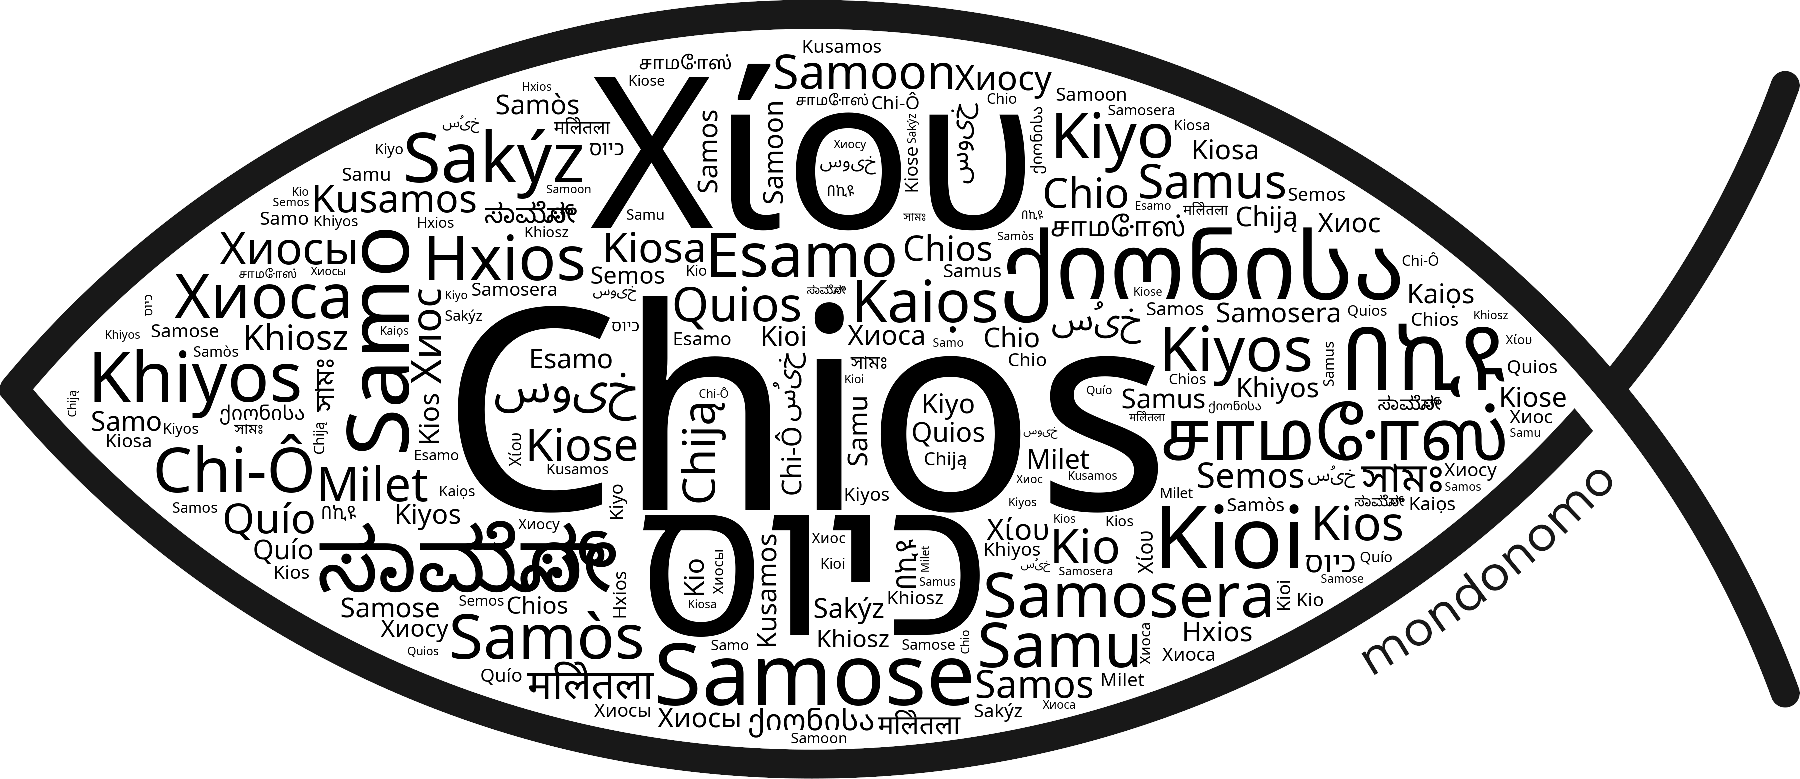 Name Chios in the world's Bibles